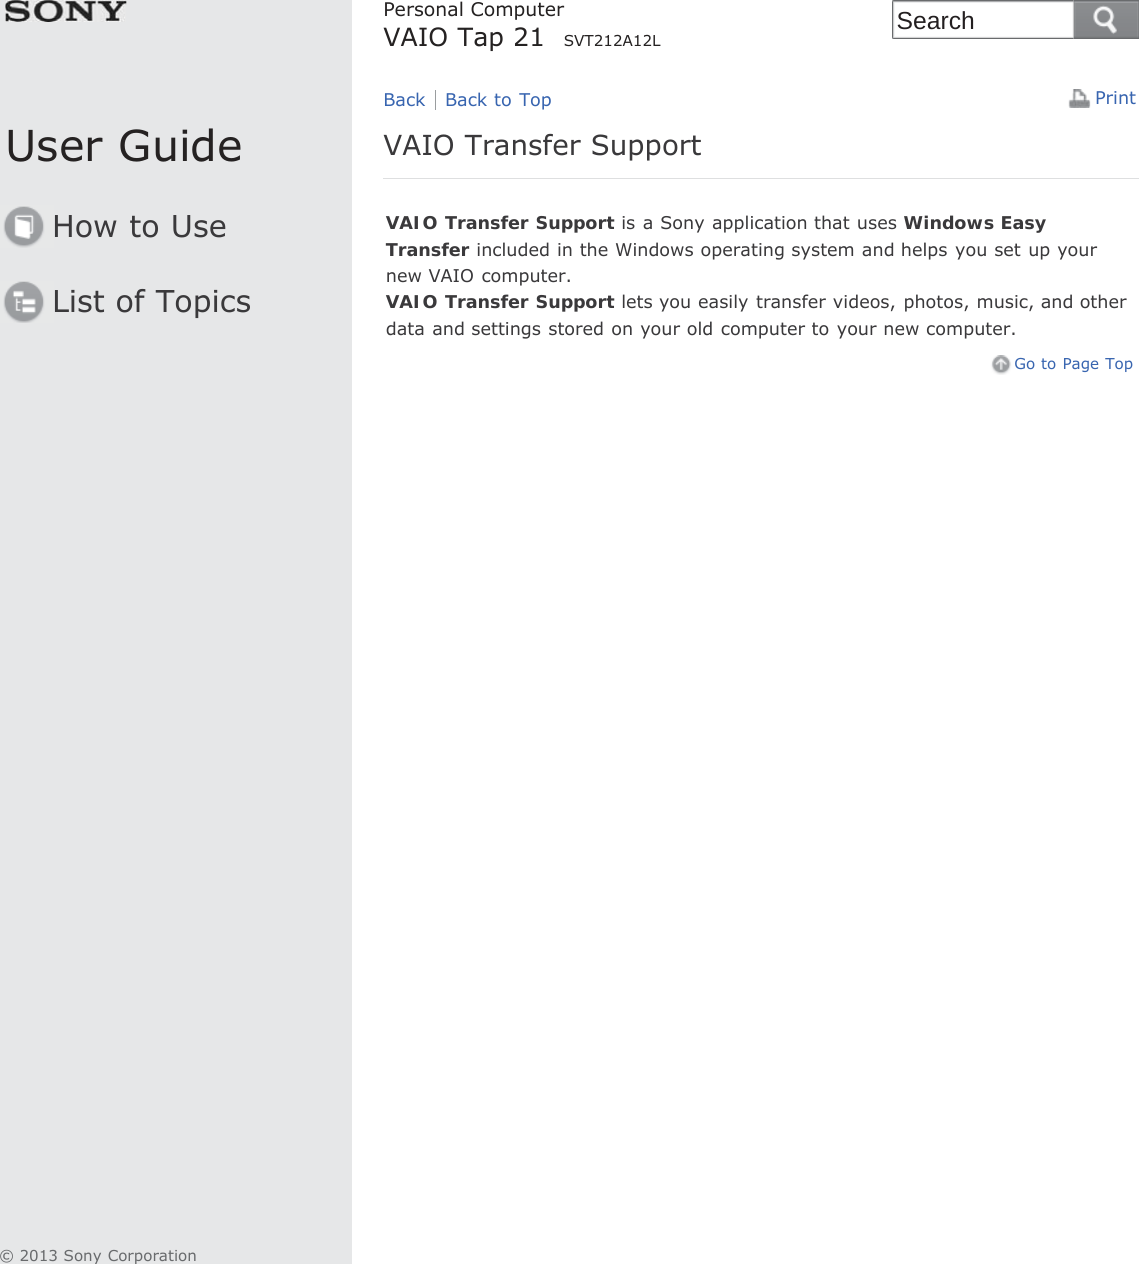 User GuideHow to UseList of TopicsPrintPersonal ComputerVAIO Tap 21  SVT212A12LVAIO Transfer SupportVAIO Transfer Support is a Sony application that uses Windows EasyTransfer included in the Windows operating system and helps you set up yournew VAIO computer.VAIO Transfer Support lets you easily transfer videos, photos, music, and otherdata and settings stored on your old computer to your new computer.Go to Page TopBack Back to Top© 2013 Sony CorporationSearch